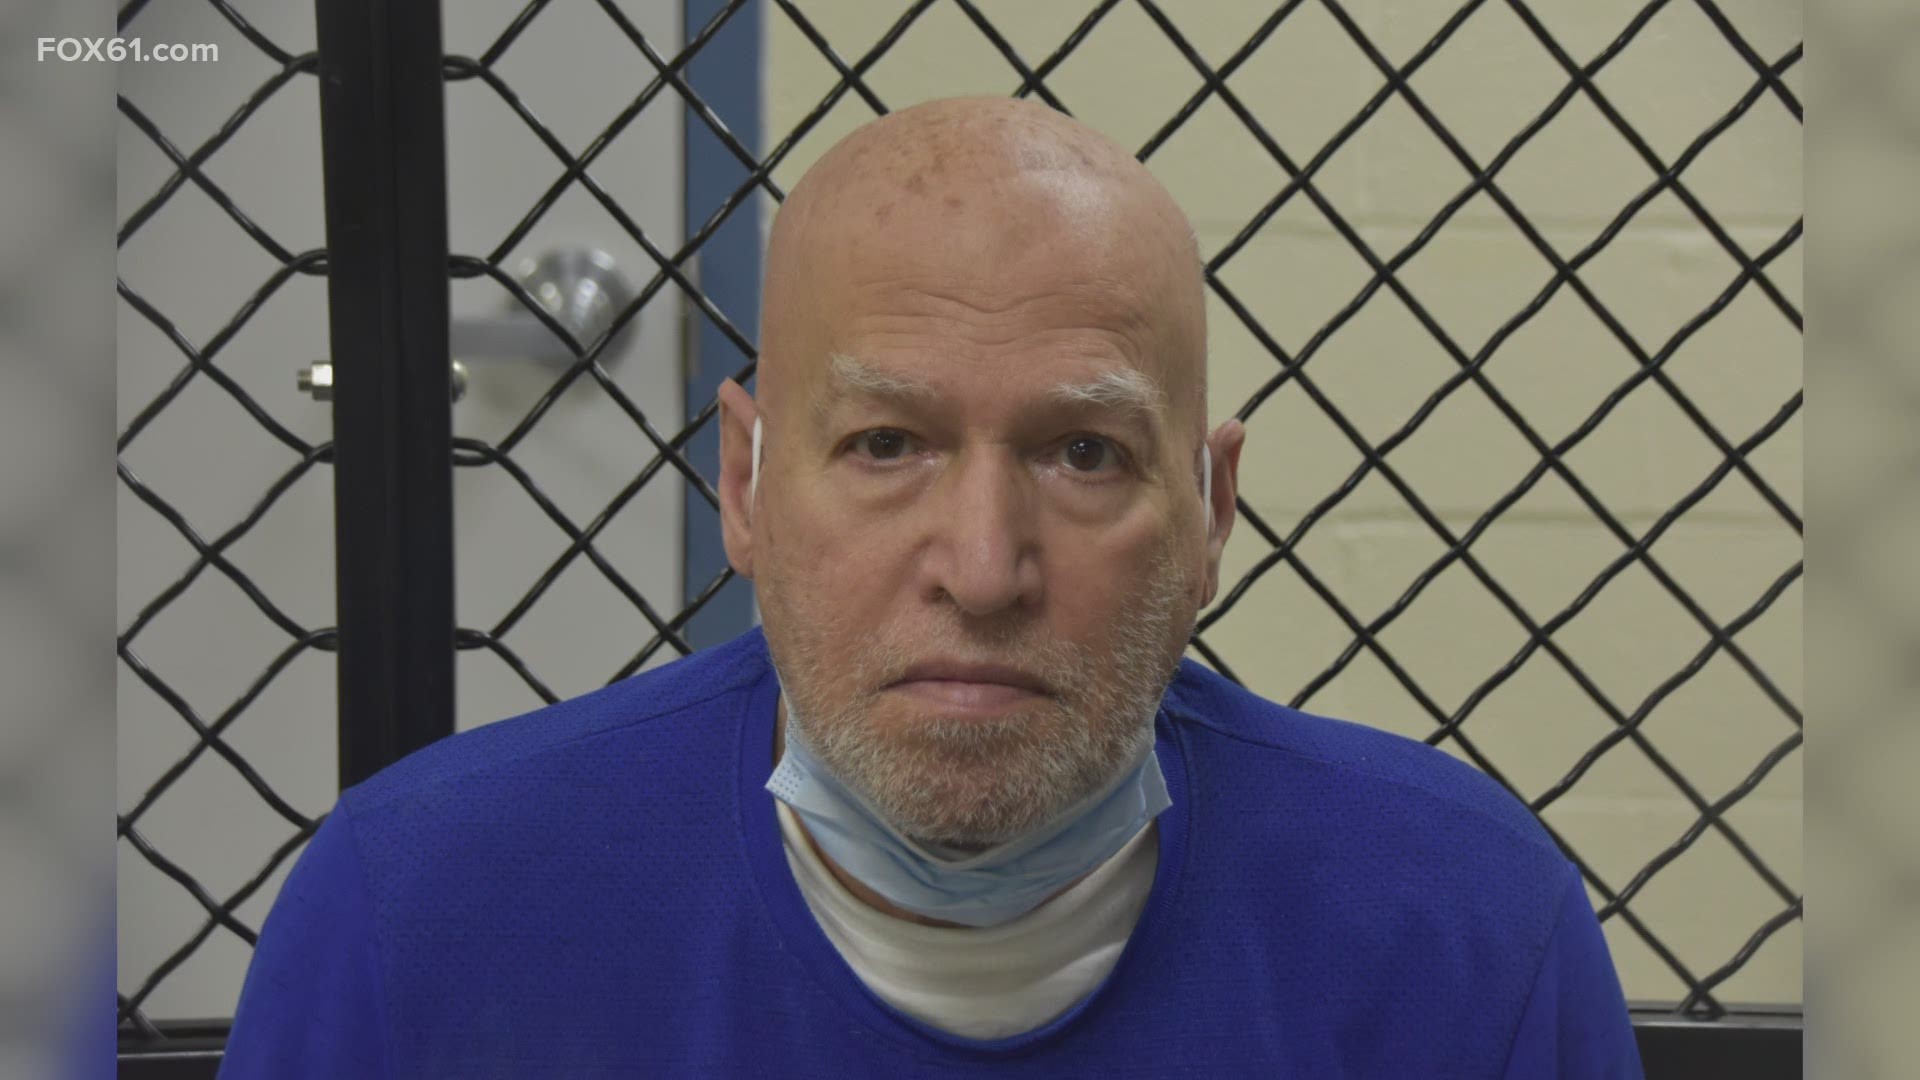 Police arrested a 73-year-old man in a Massachusetts county jail, charging him with three counts of kidnapping.